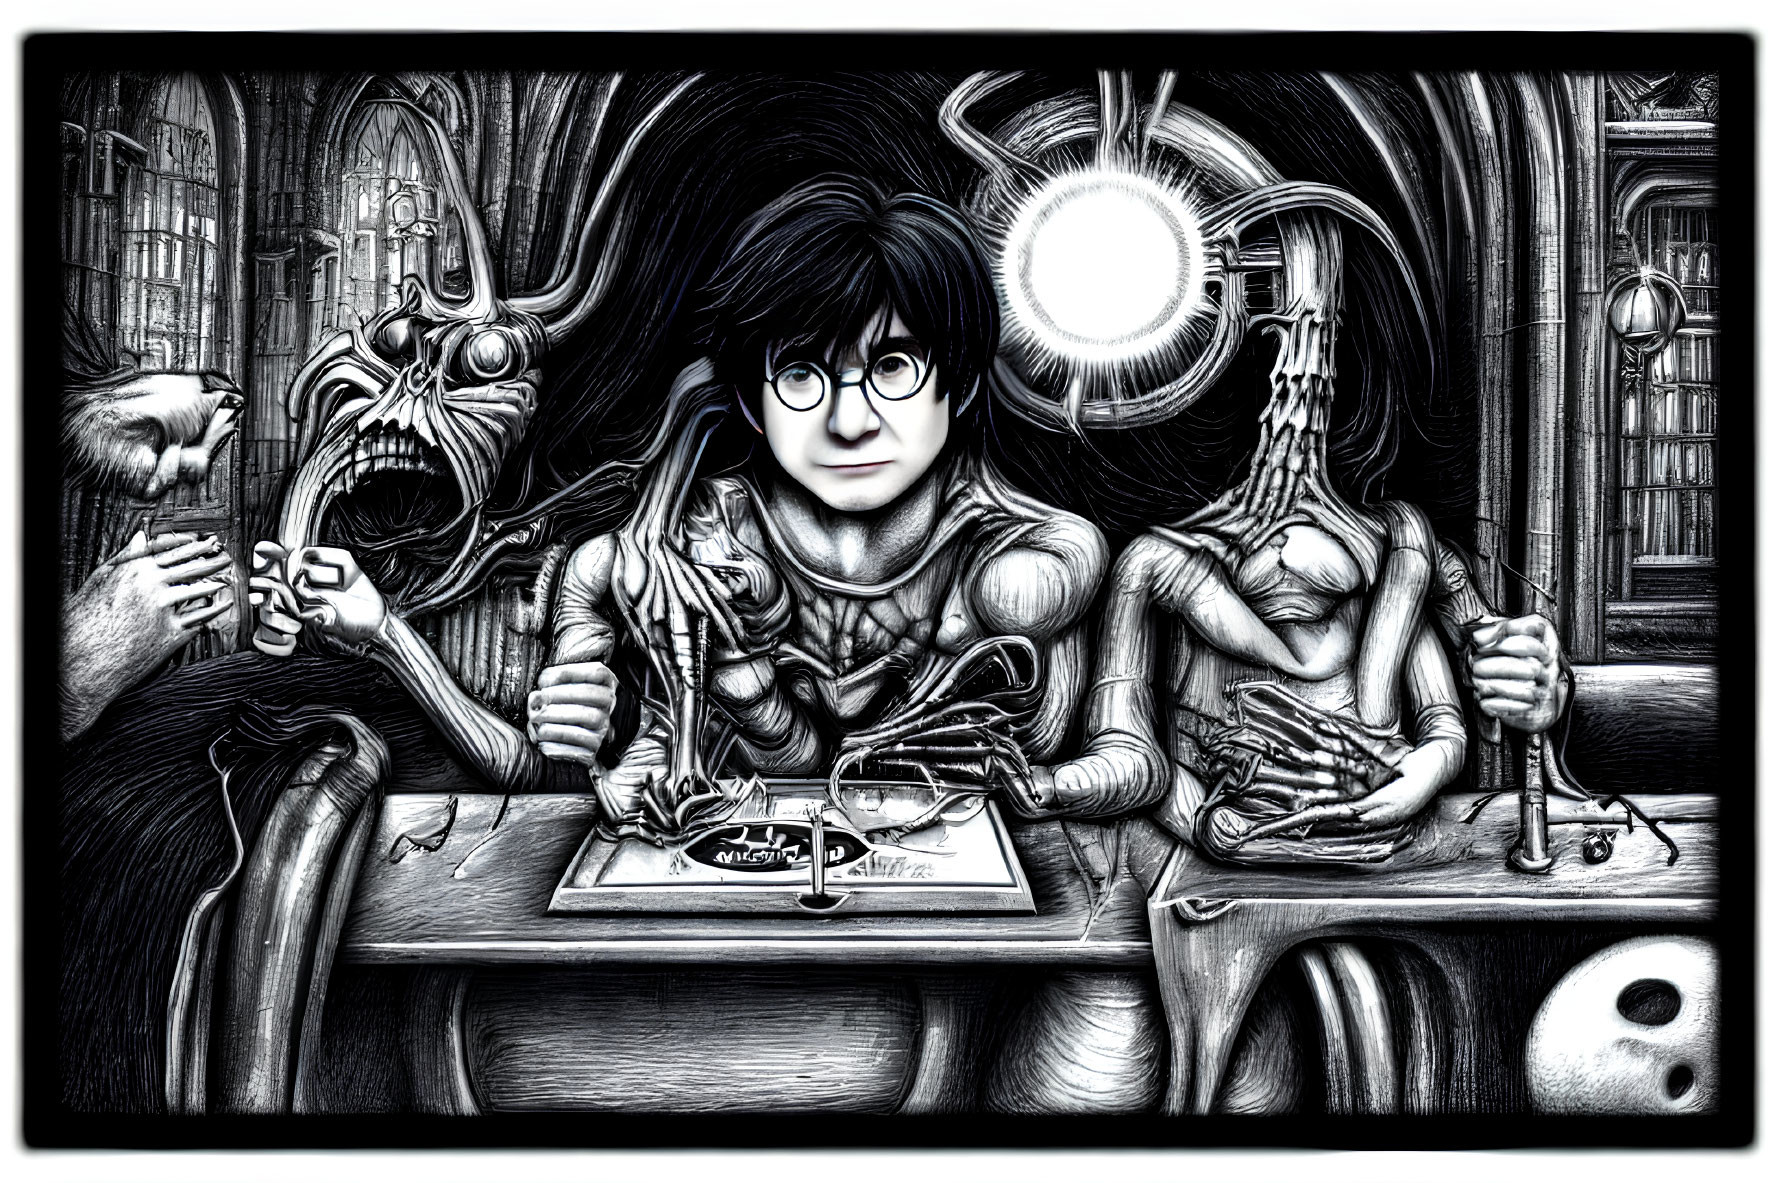 Boy with glasses writing in a book surrounded by magical creatures in dark, eerie room